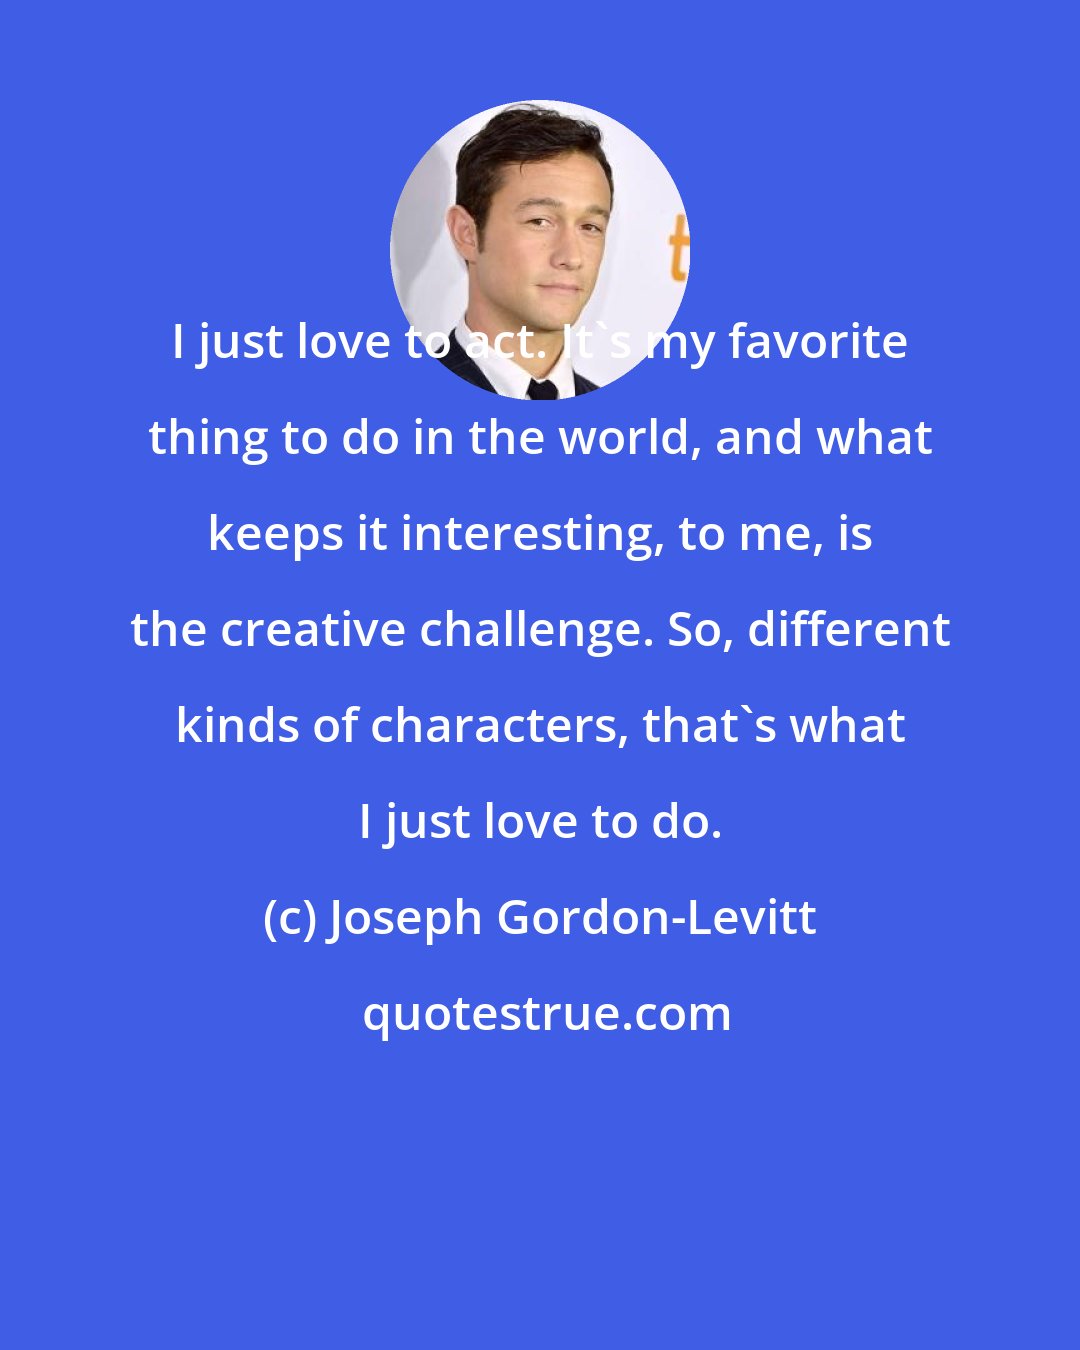 Joseph Gordon-Levitt: I just love to act. It's my favorite thing to do in the world, and what keeps it interesting, to me, is the creative challenge. So, different kinds of characters, that's what I just love to do.